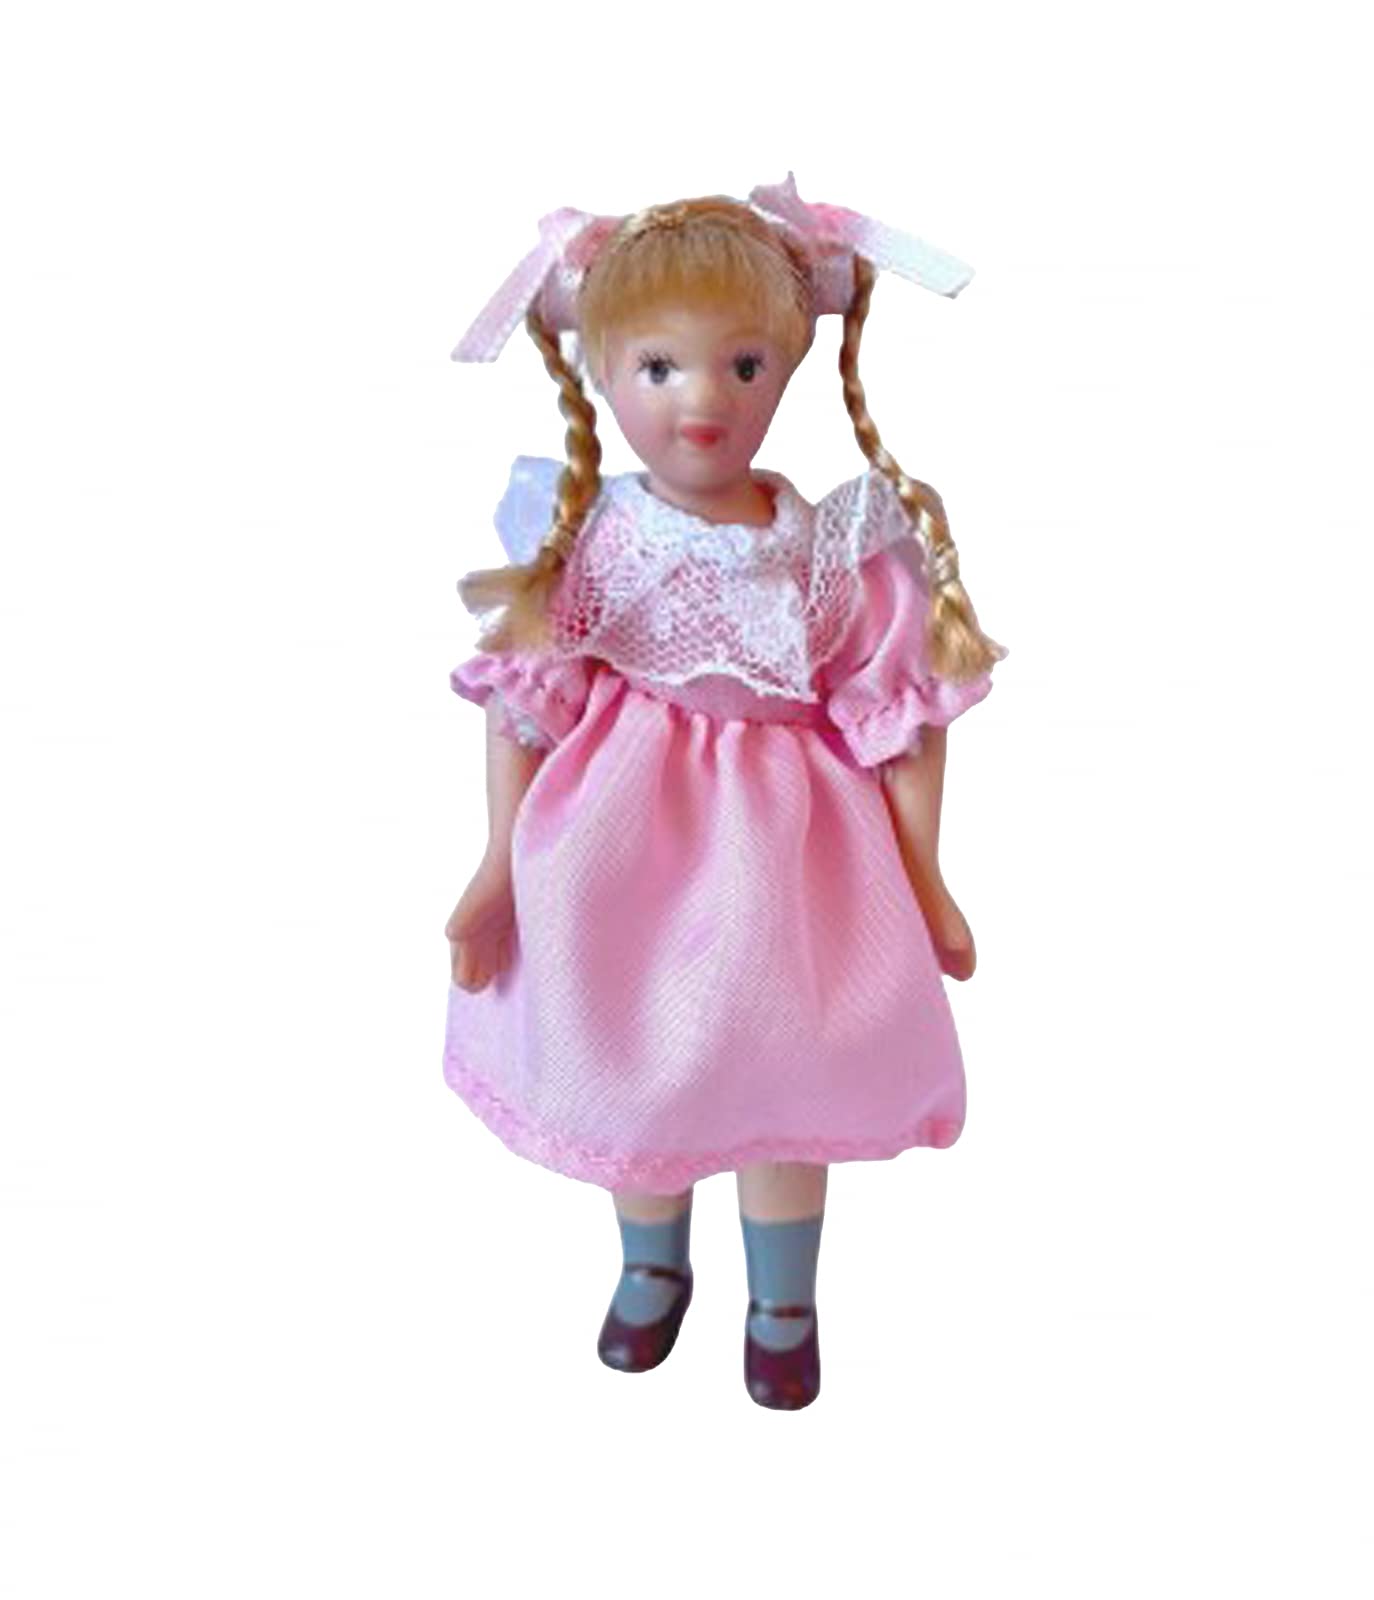 Melody Jane Dolls Houses Dollhouse Little Girl in Traditional Pink Dress Porcelain 1:12 Scale People